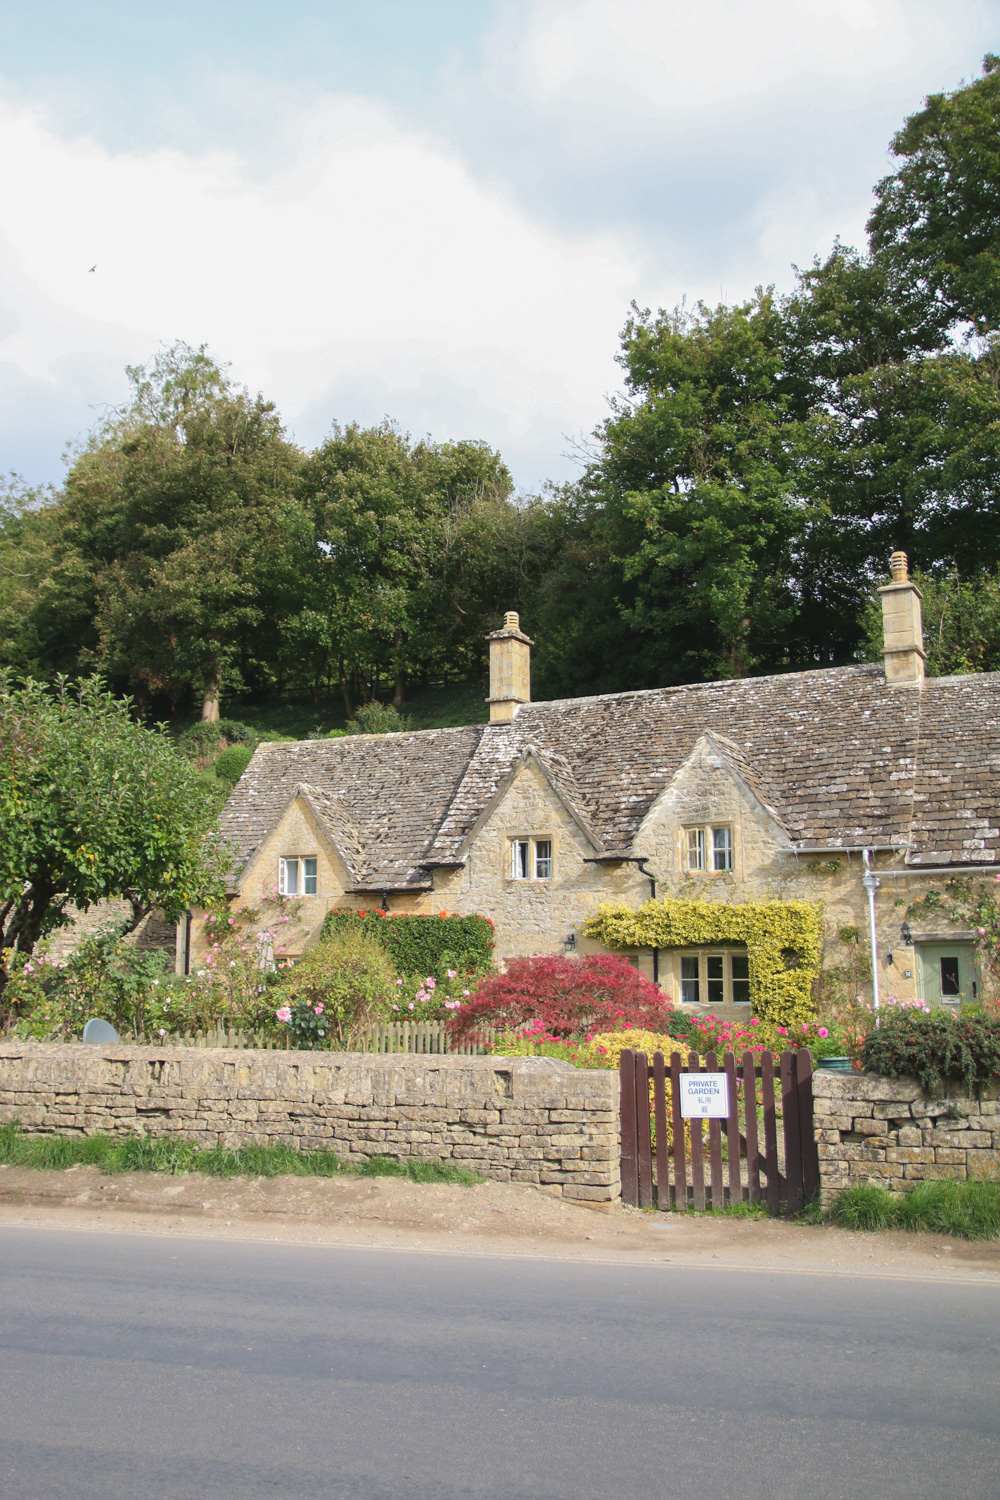 Village of Bibury in The Cotswolds